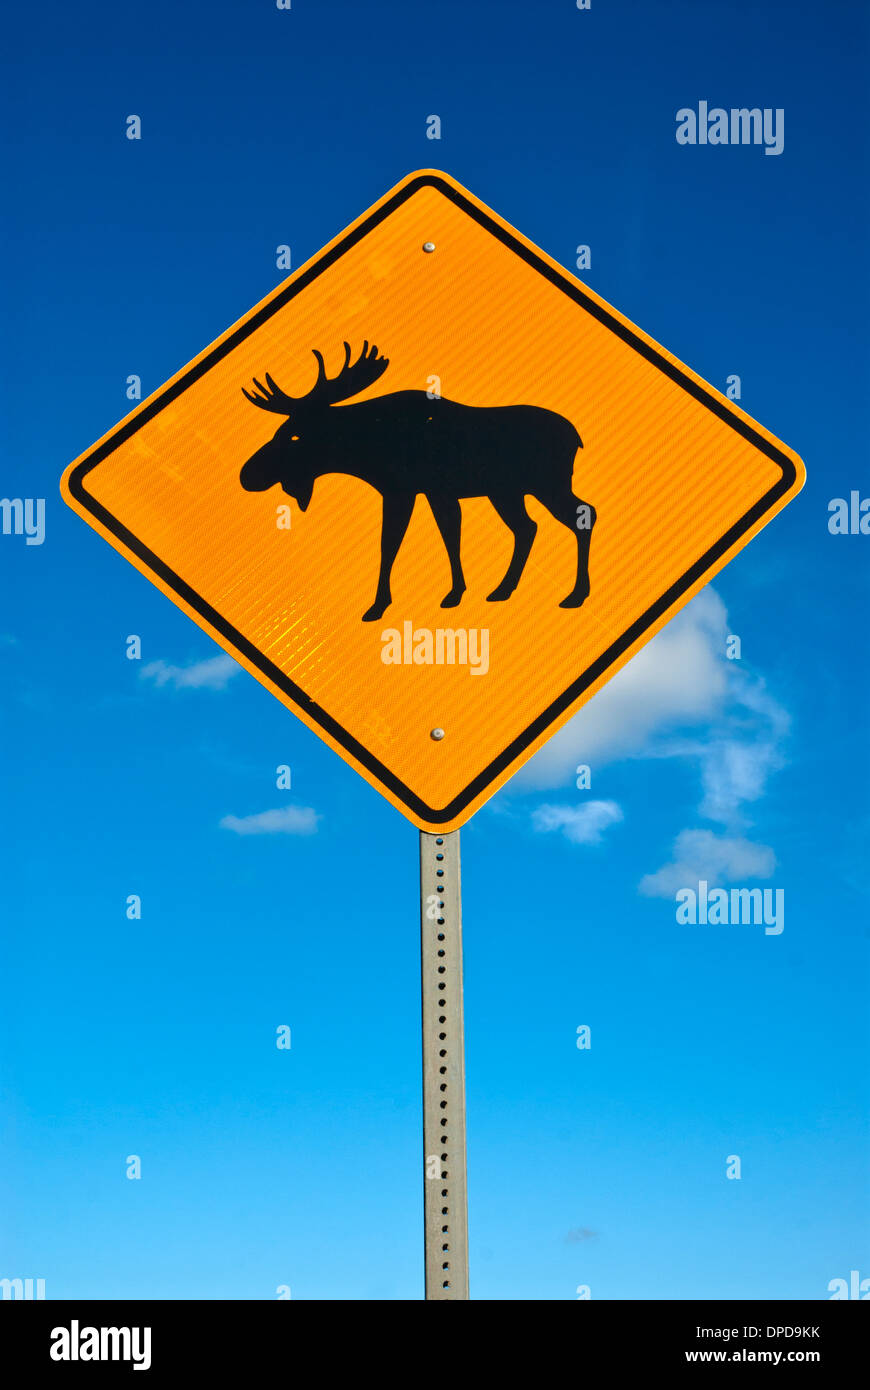 Moose Crossing Road Sign Banque D'Images